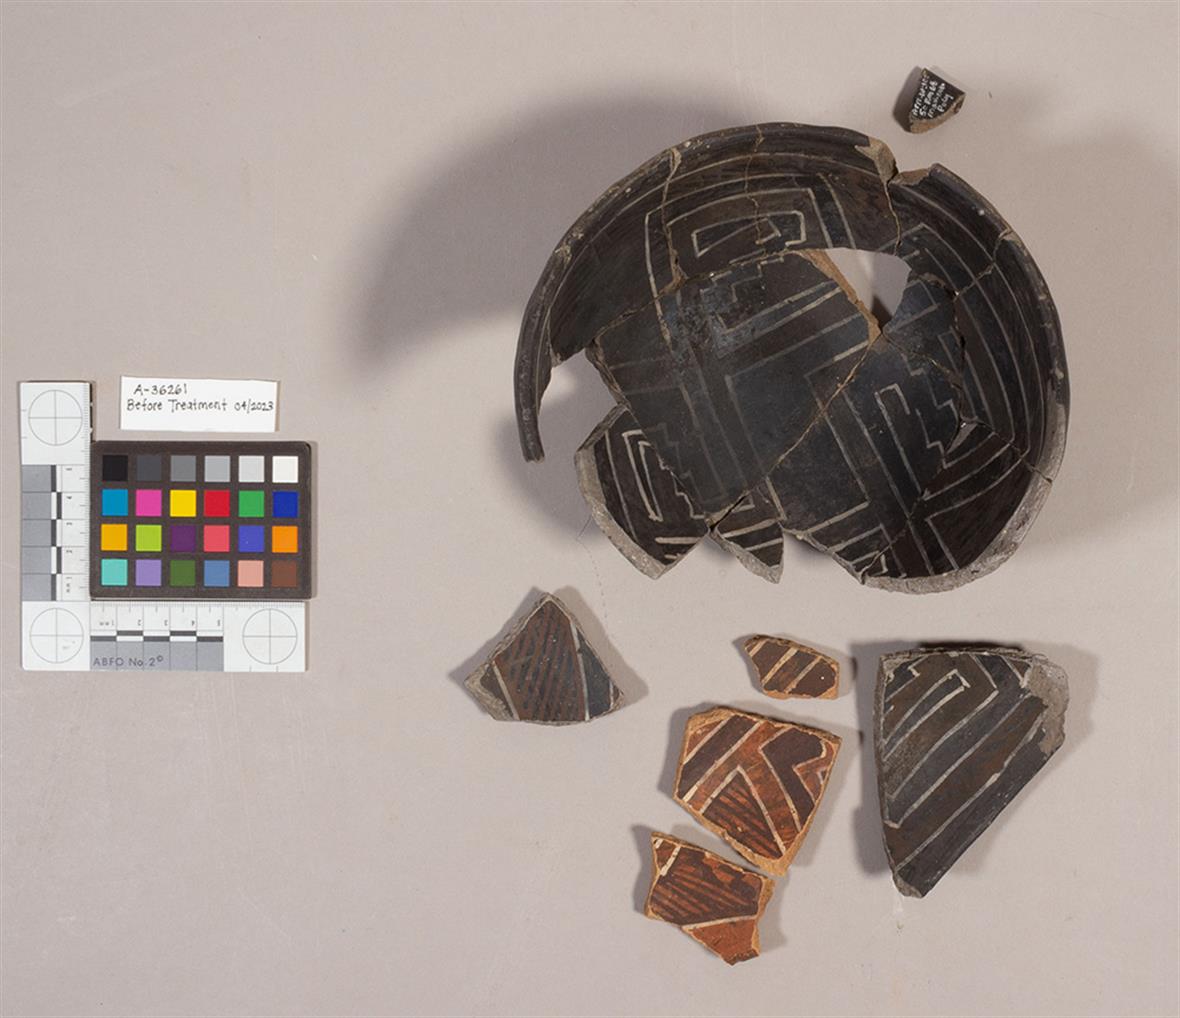 Documentation image (with color and scale measurements) of a broken ceramic; the loose pieces sit nearby.